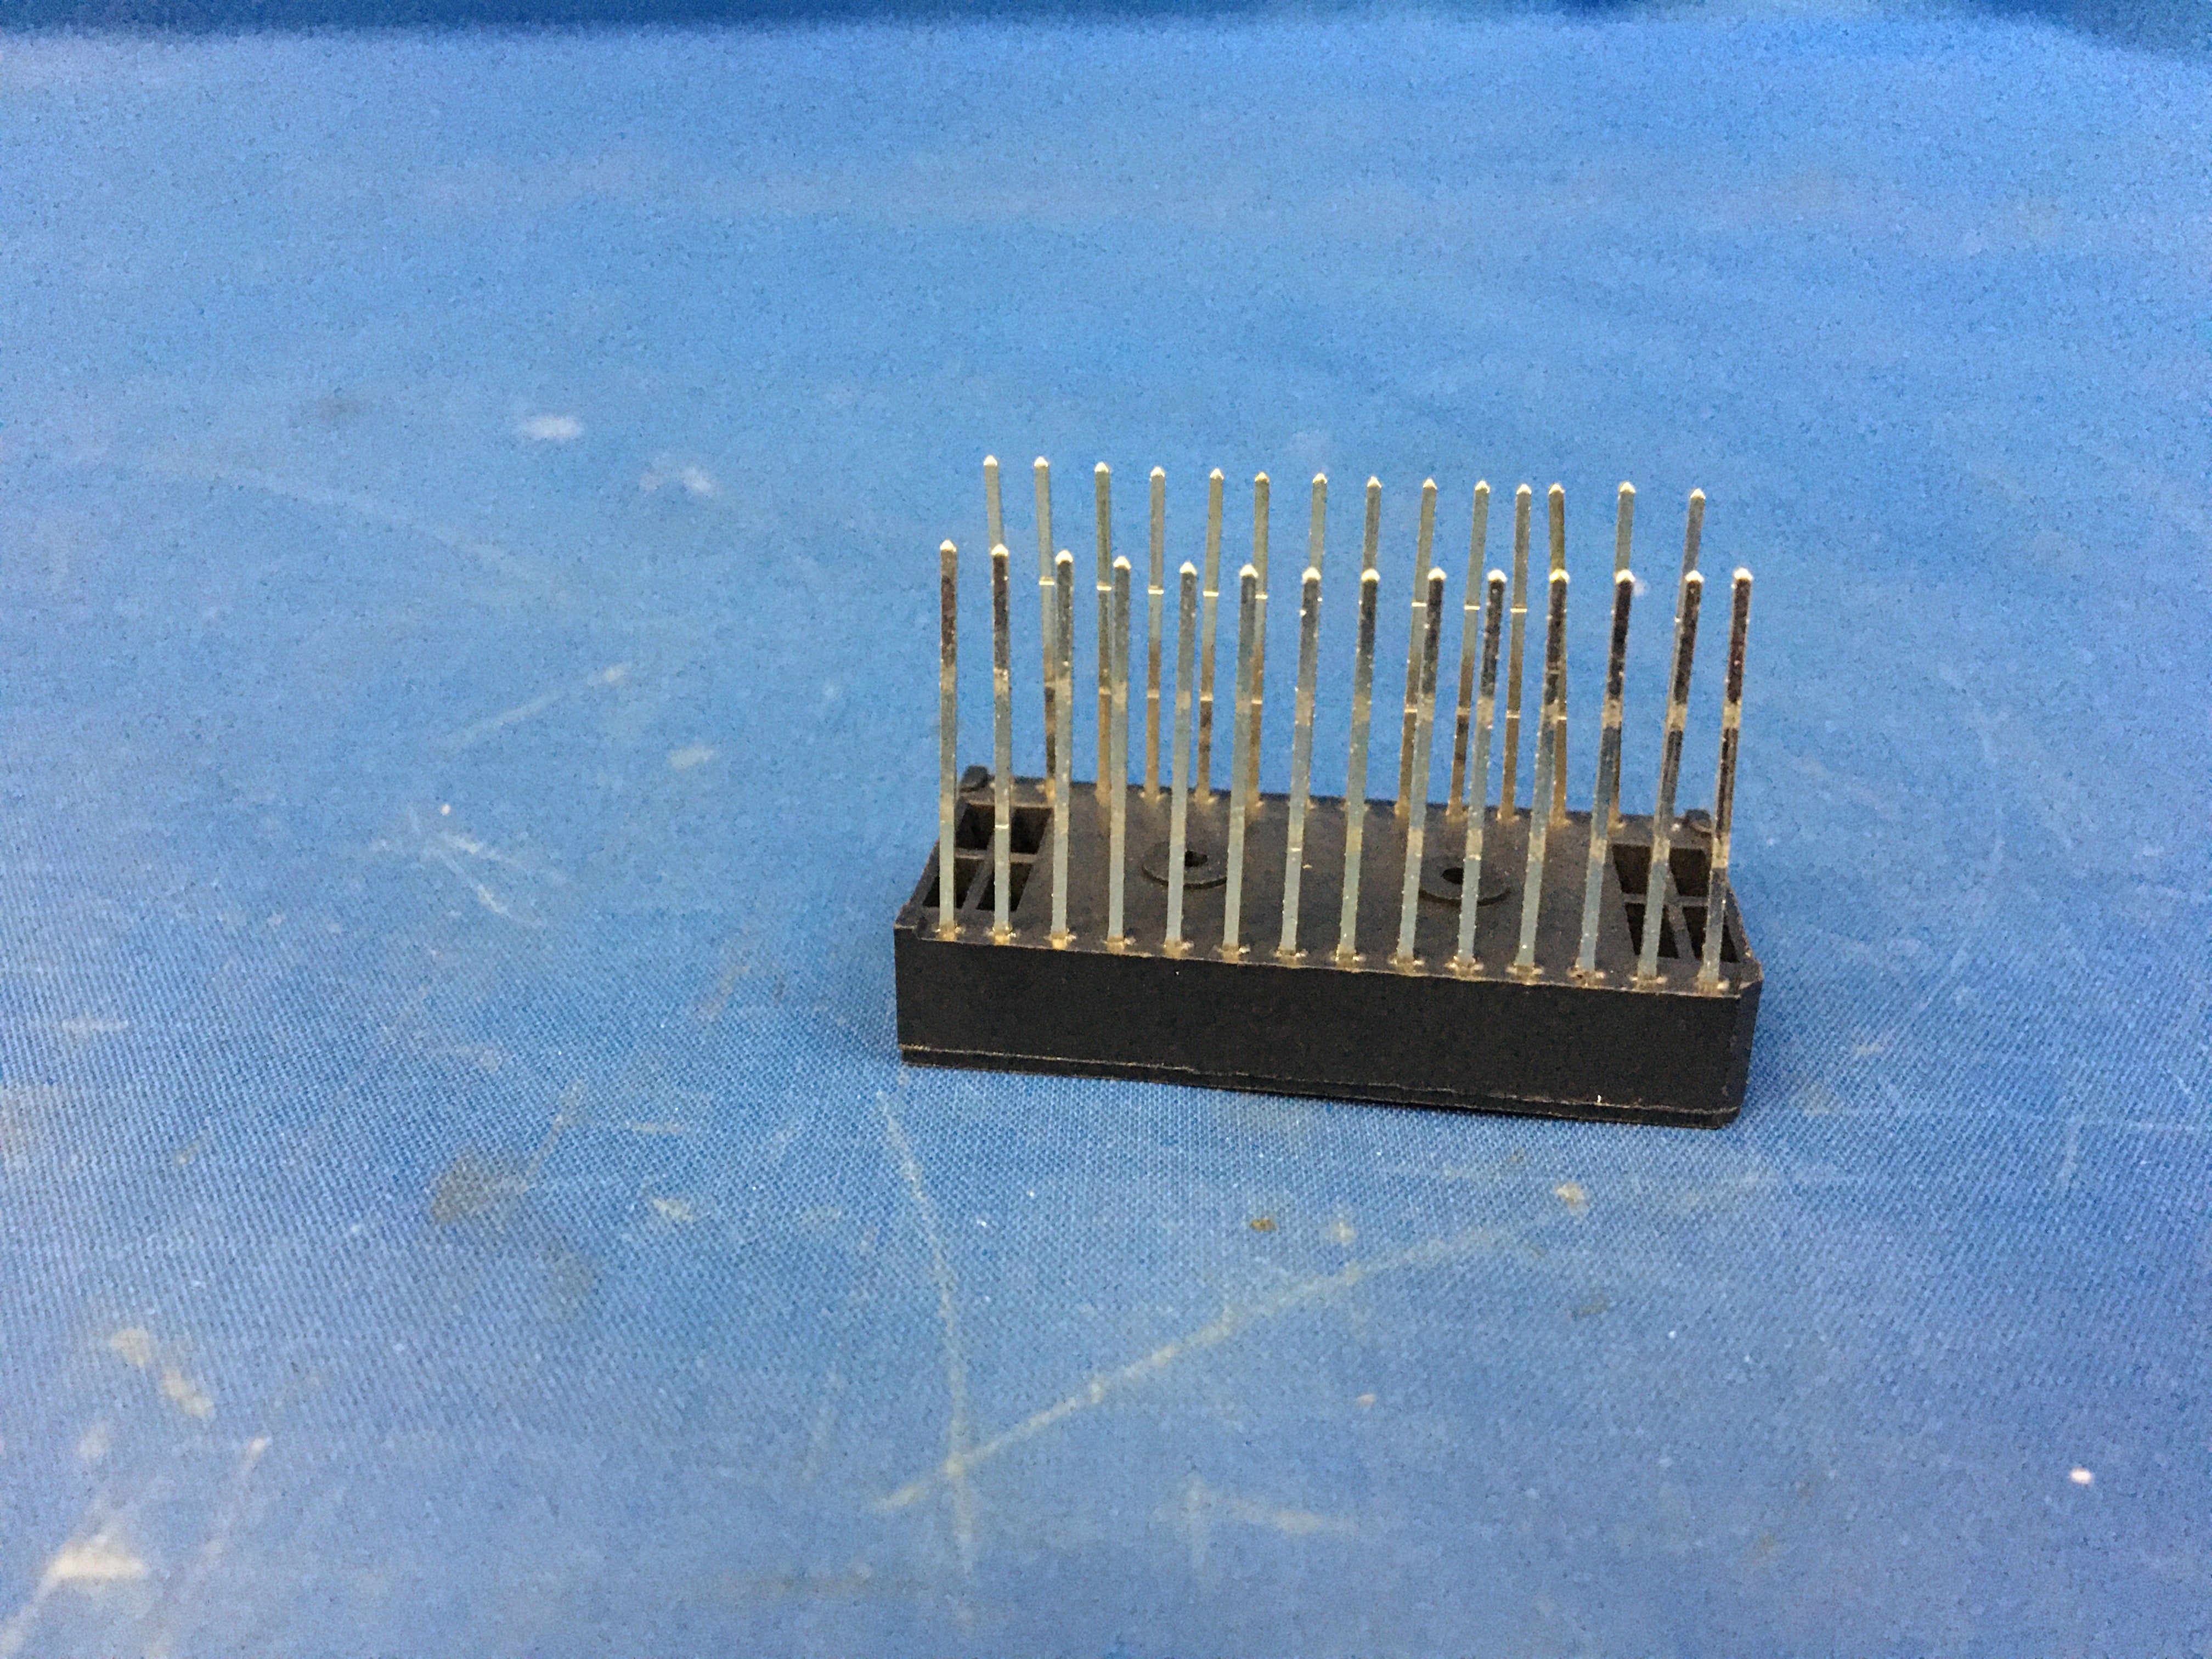 Texas Instruments C812804 Plug-in Electronic Components Socket NSN:5935-01-085-8380